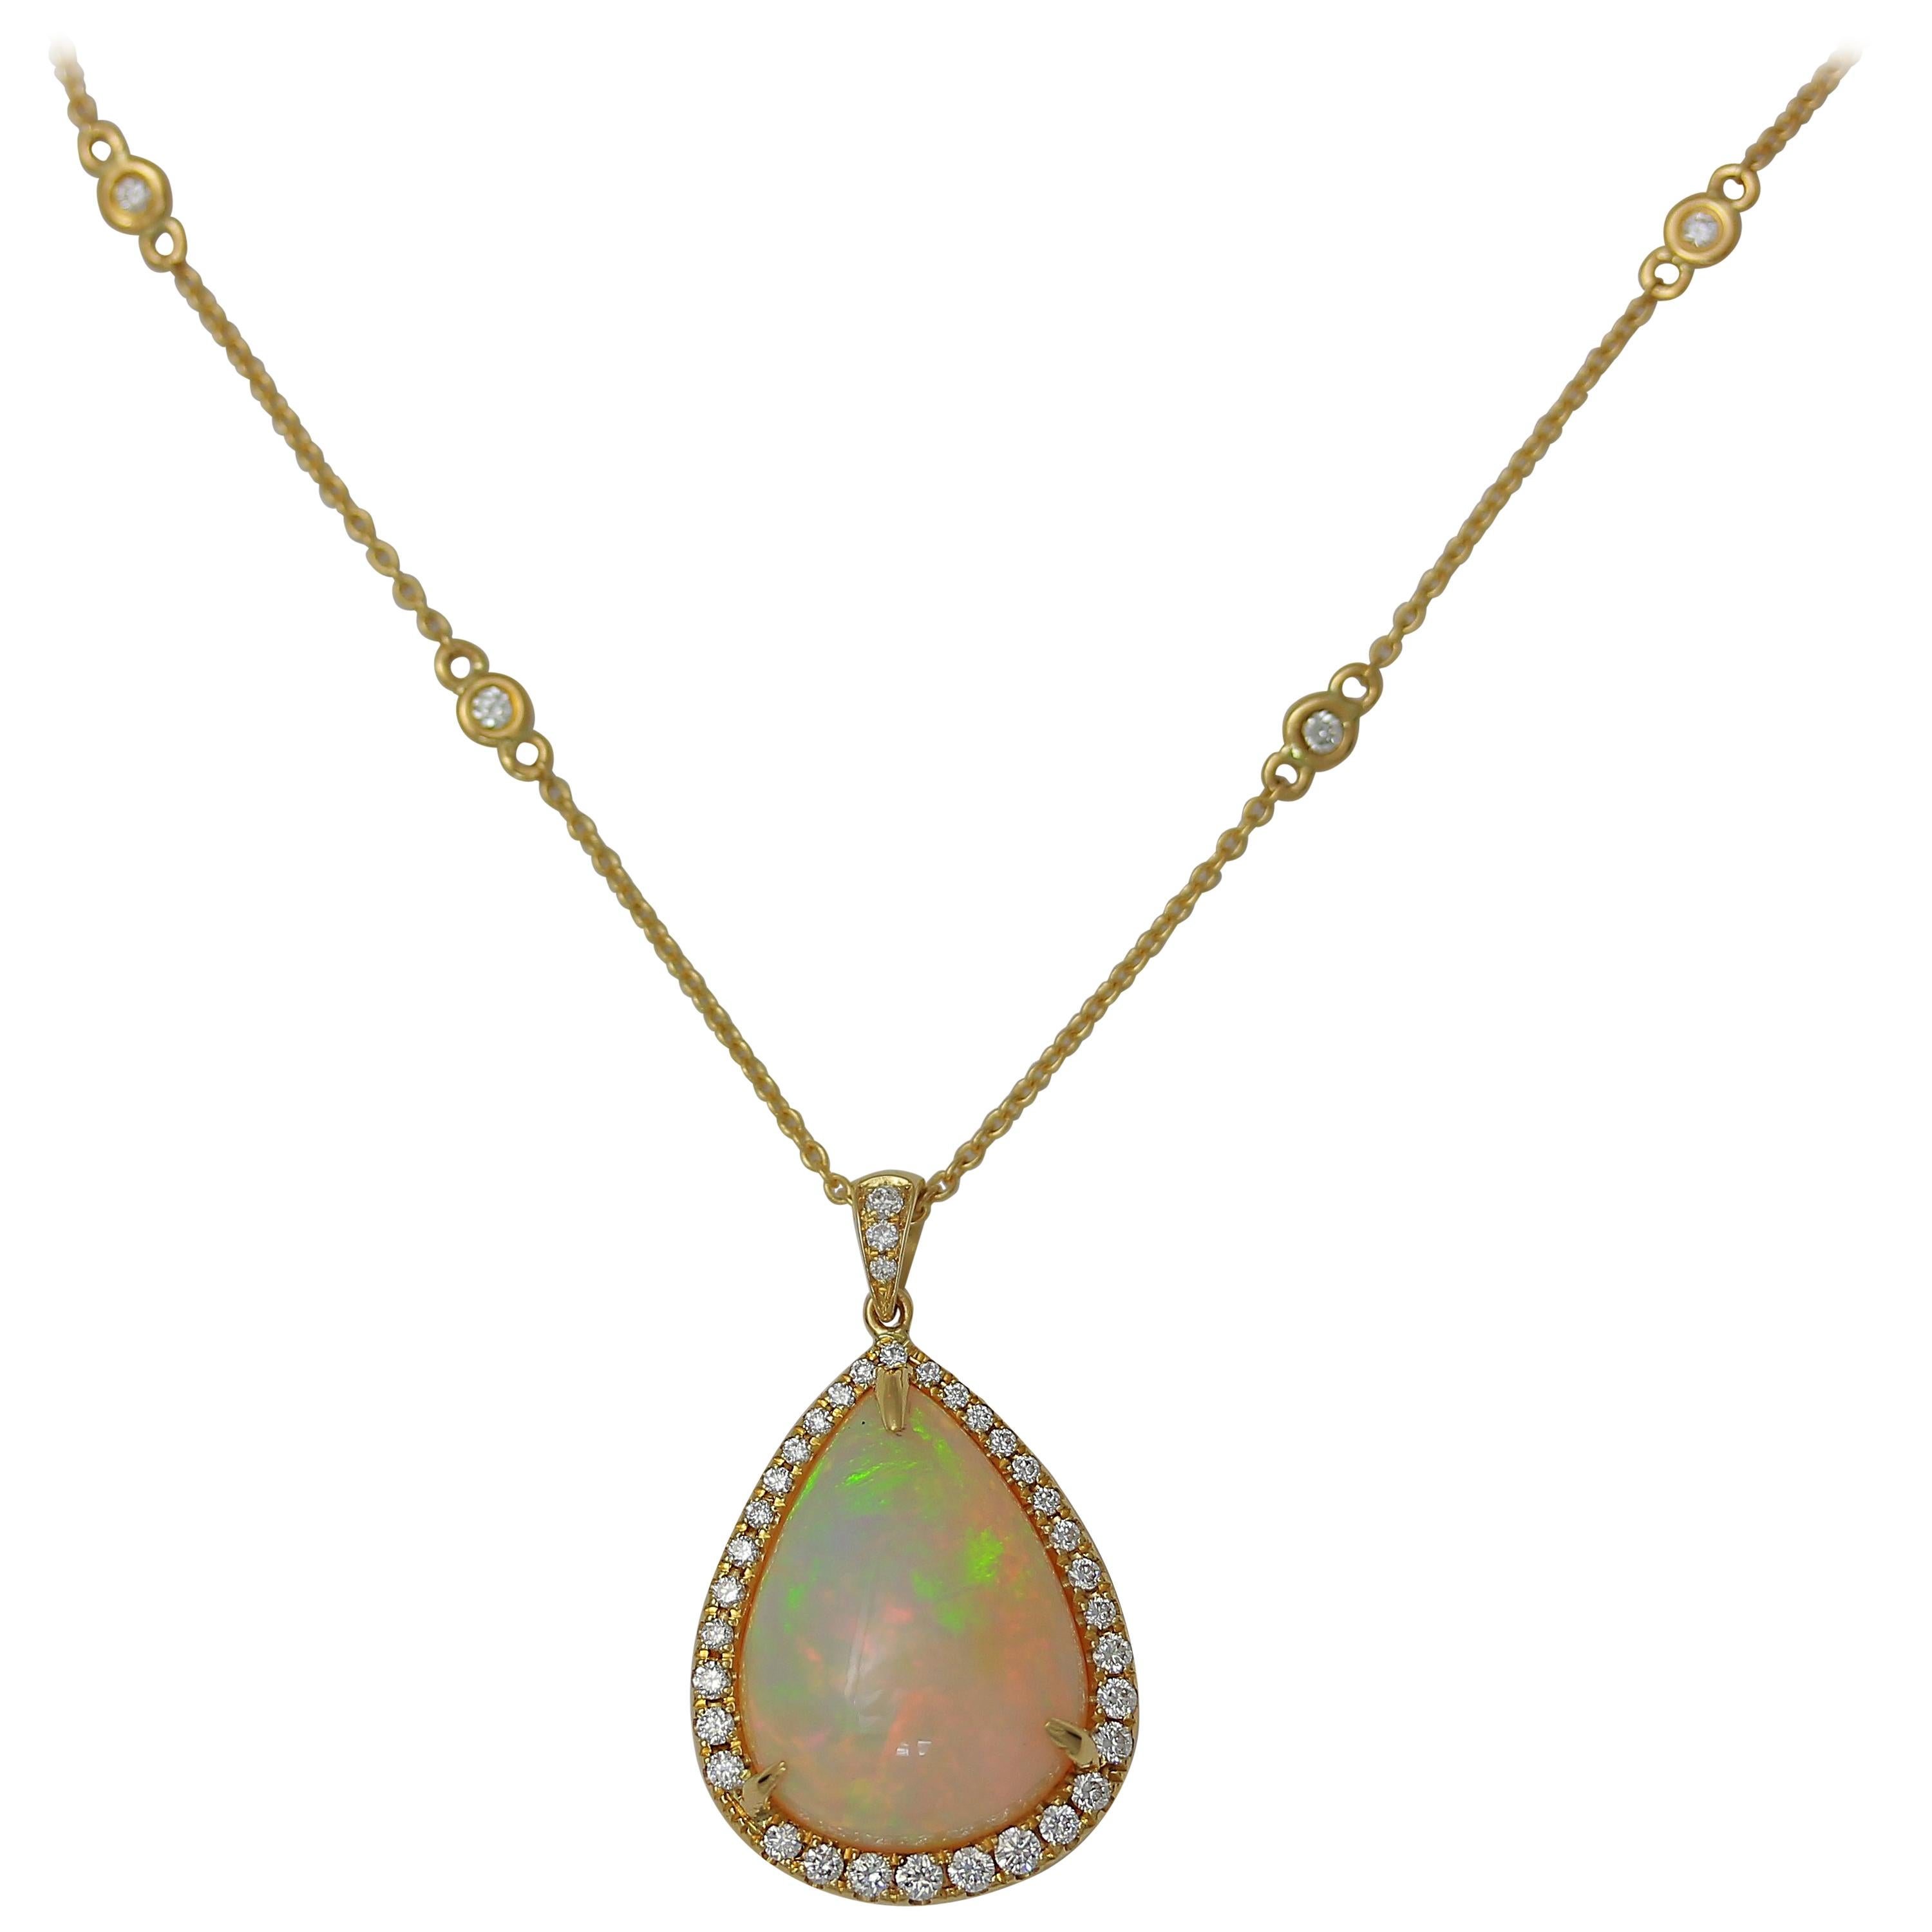 Frederic Sage 8.30 CTPear Shape Cab Opal One of Kind Pendant Necklace with chain